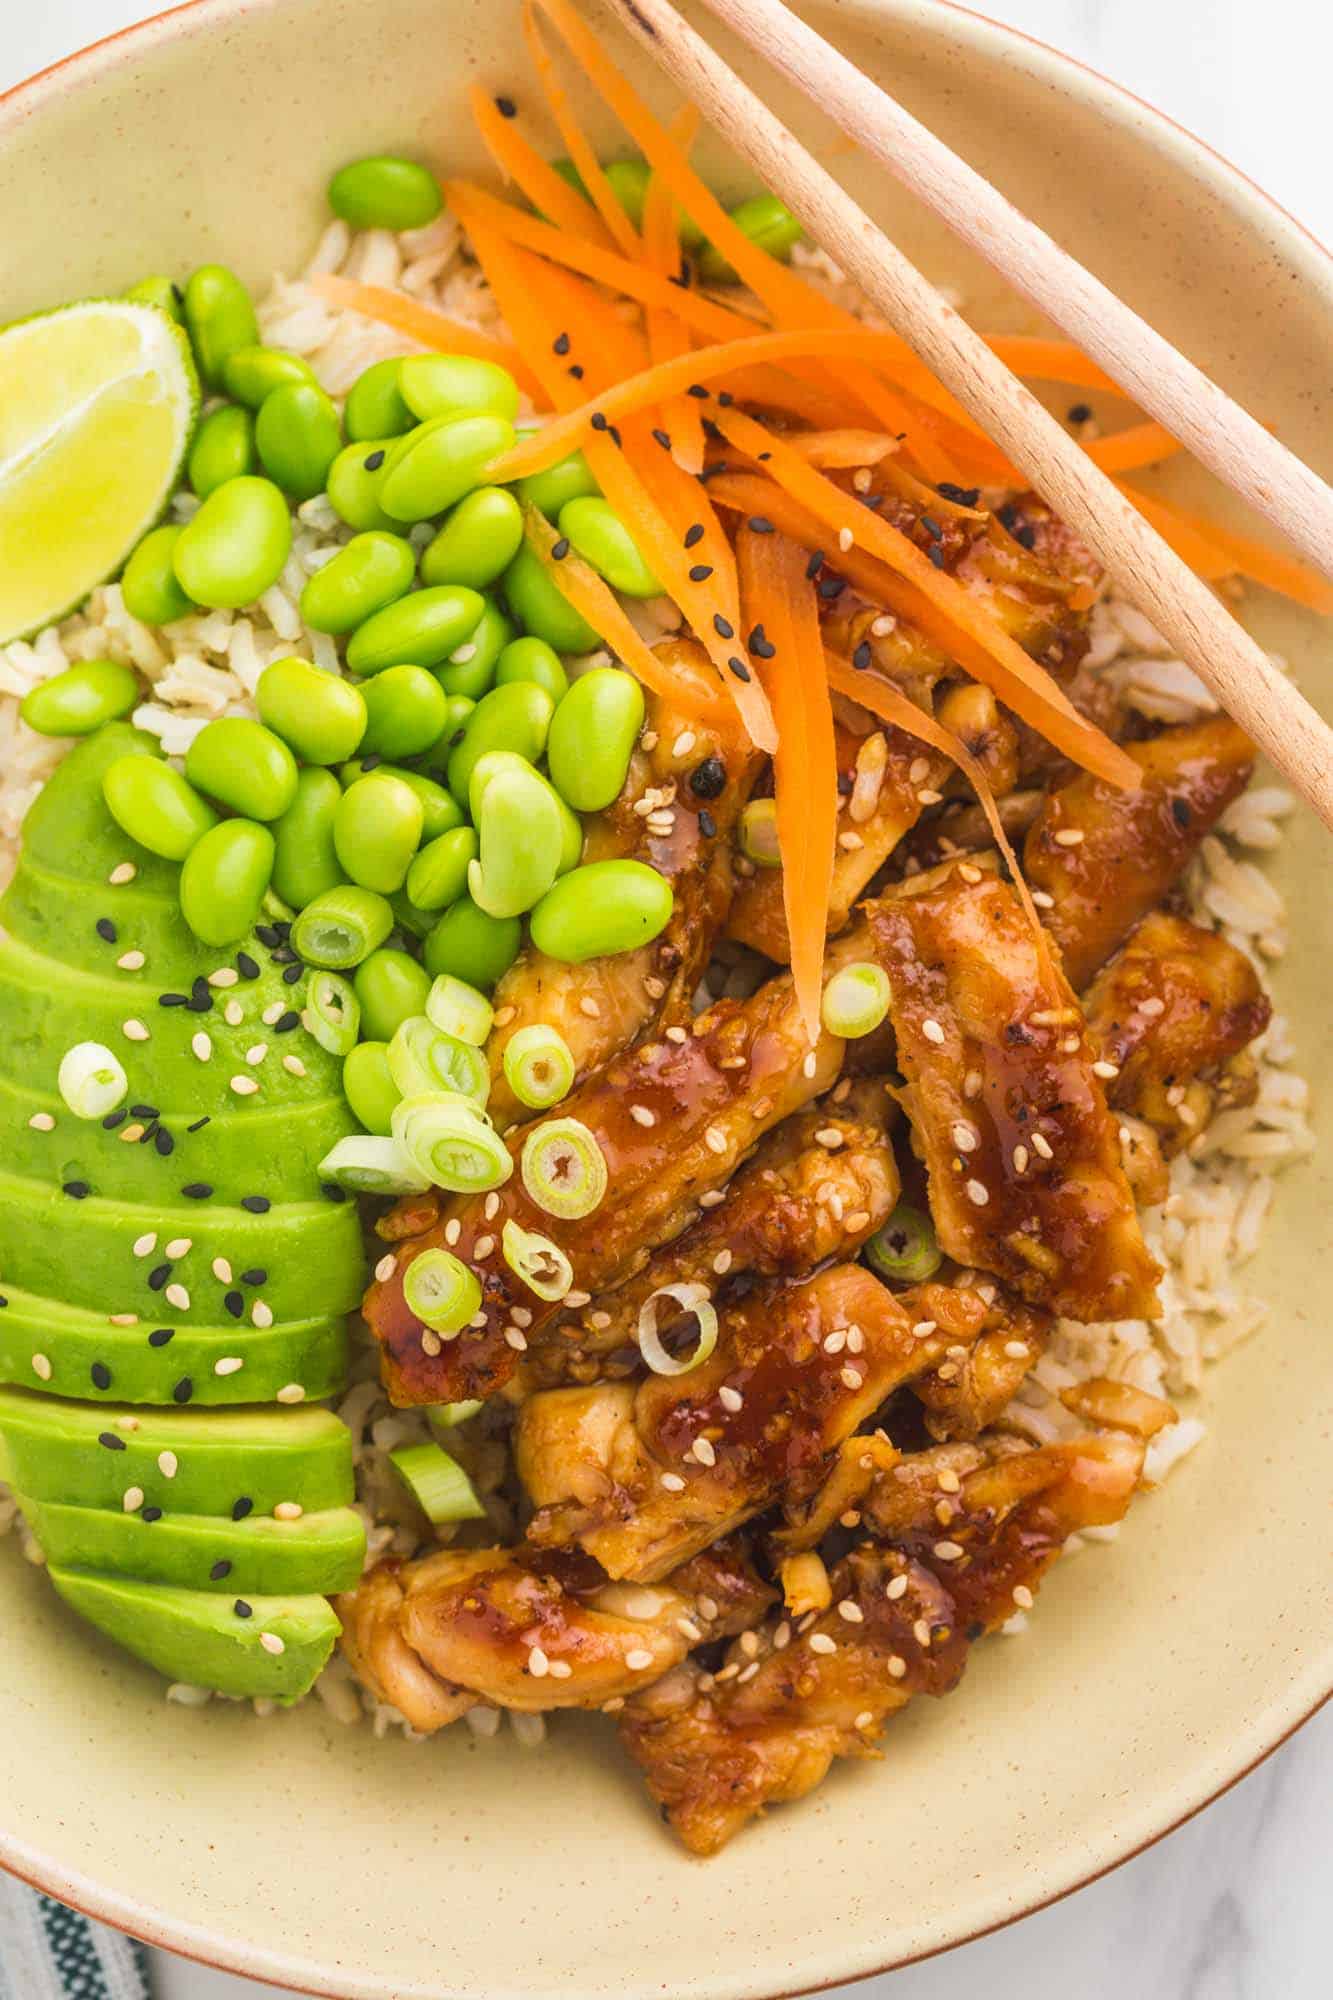 View from above of a teriyaki chicken bowl with avocado, edamame, carrots and rice.